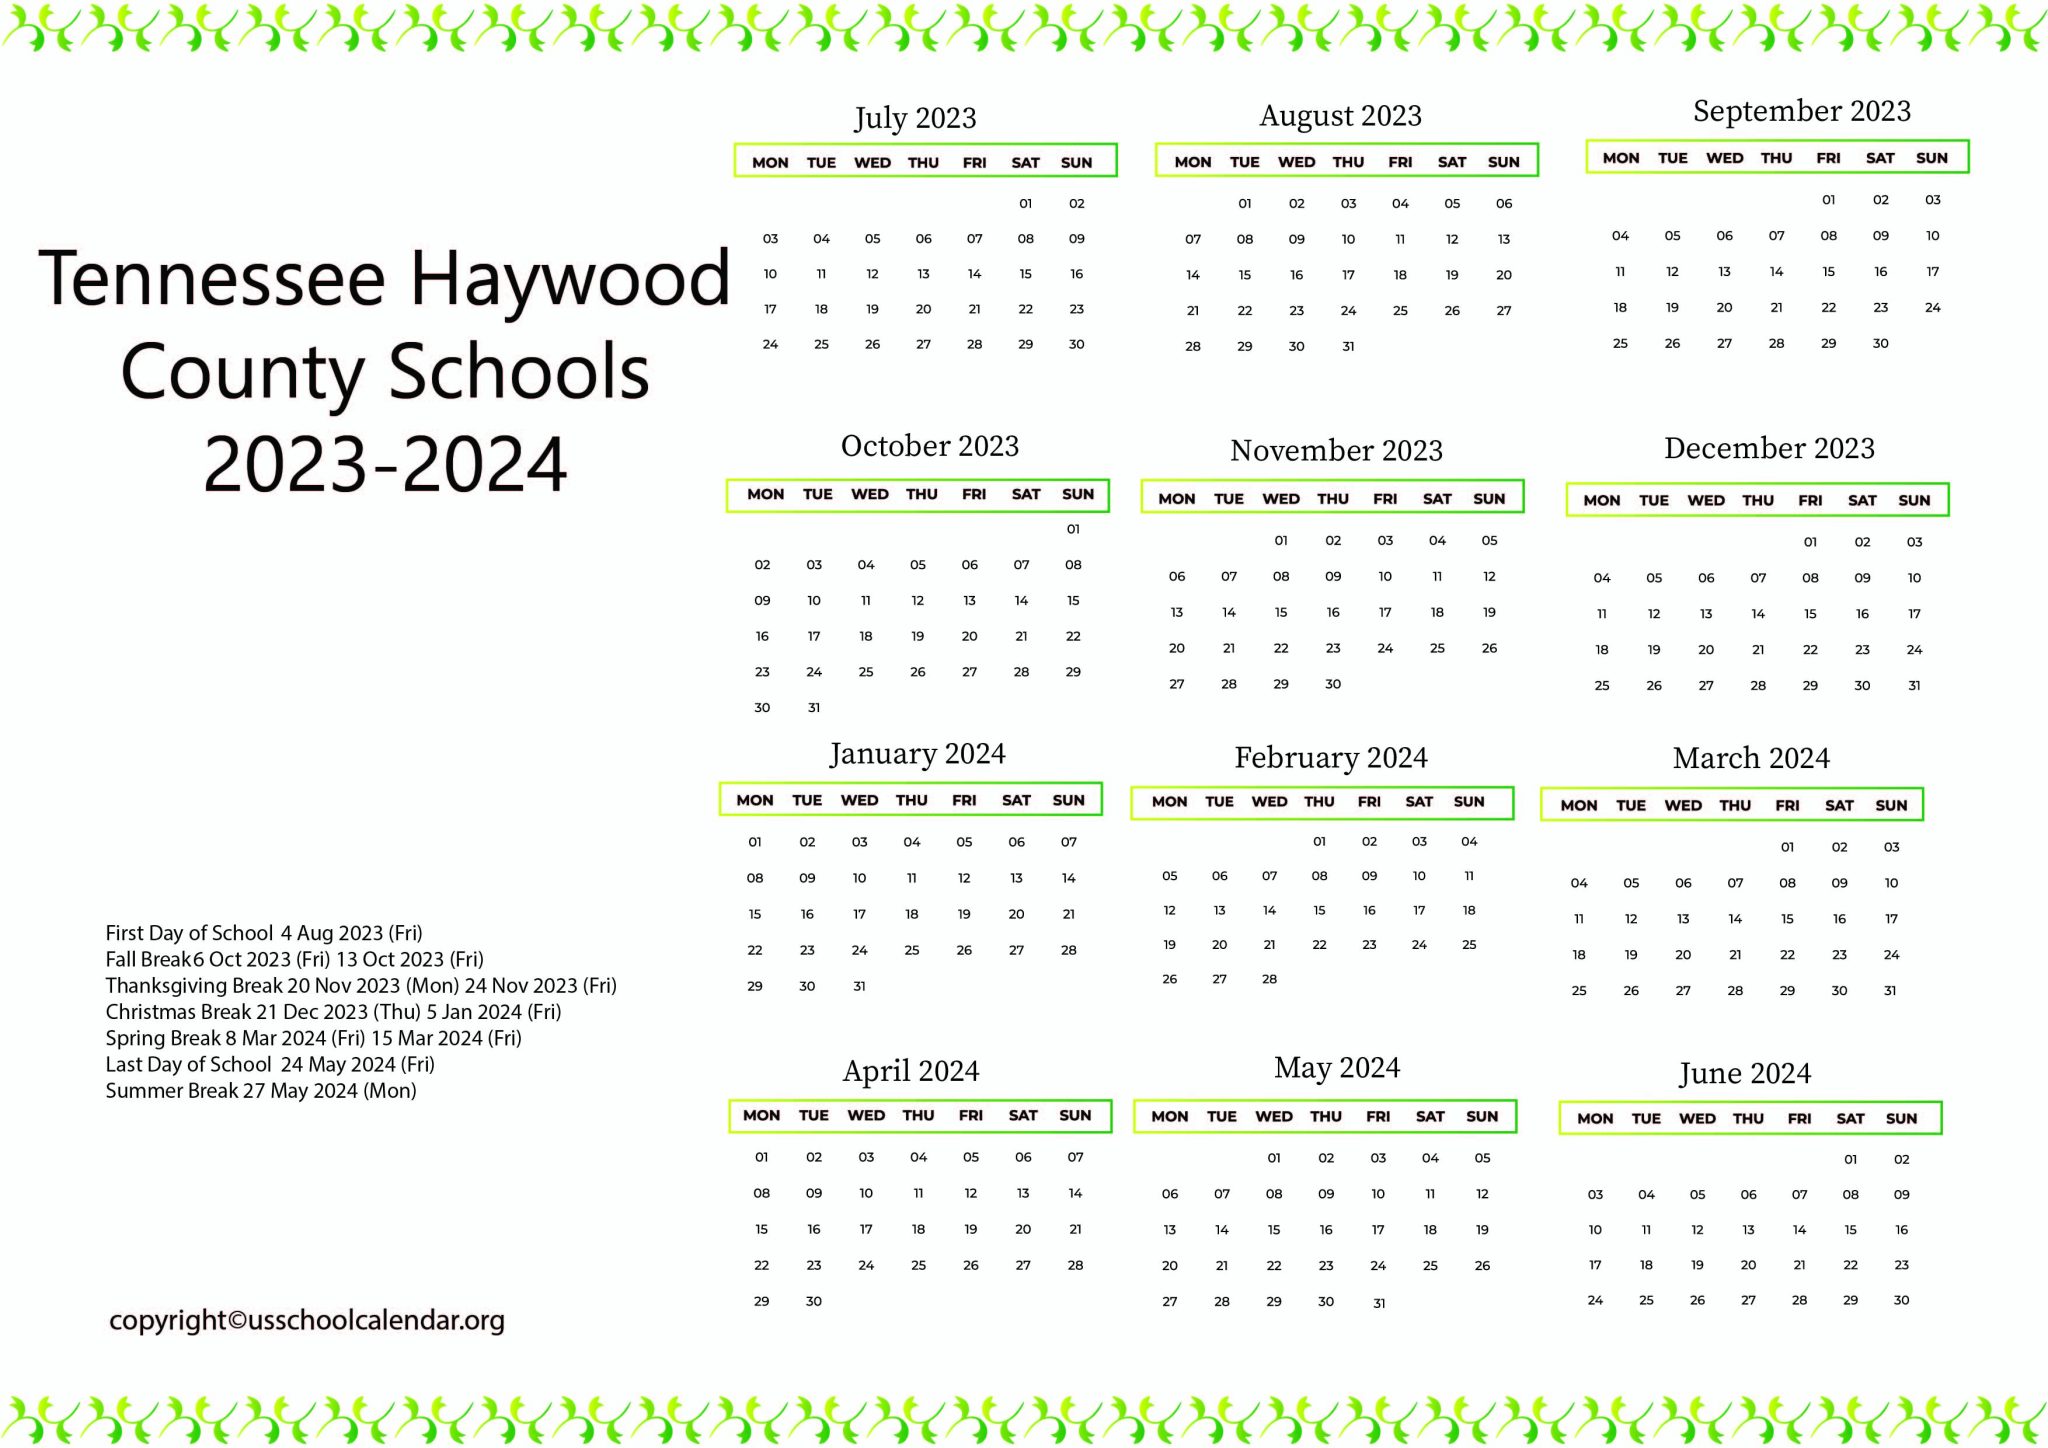 tennessee-haywood-county-schools-calendar-for-2023-2024